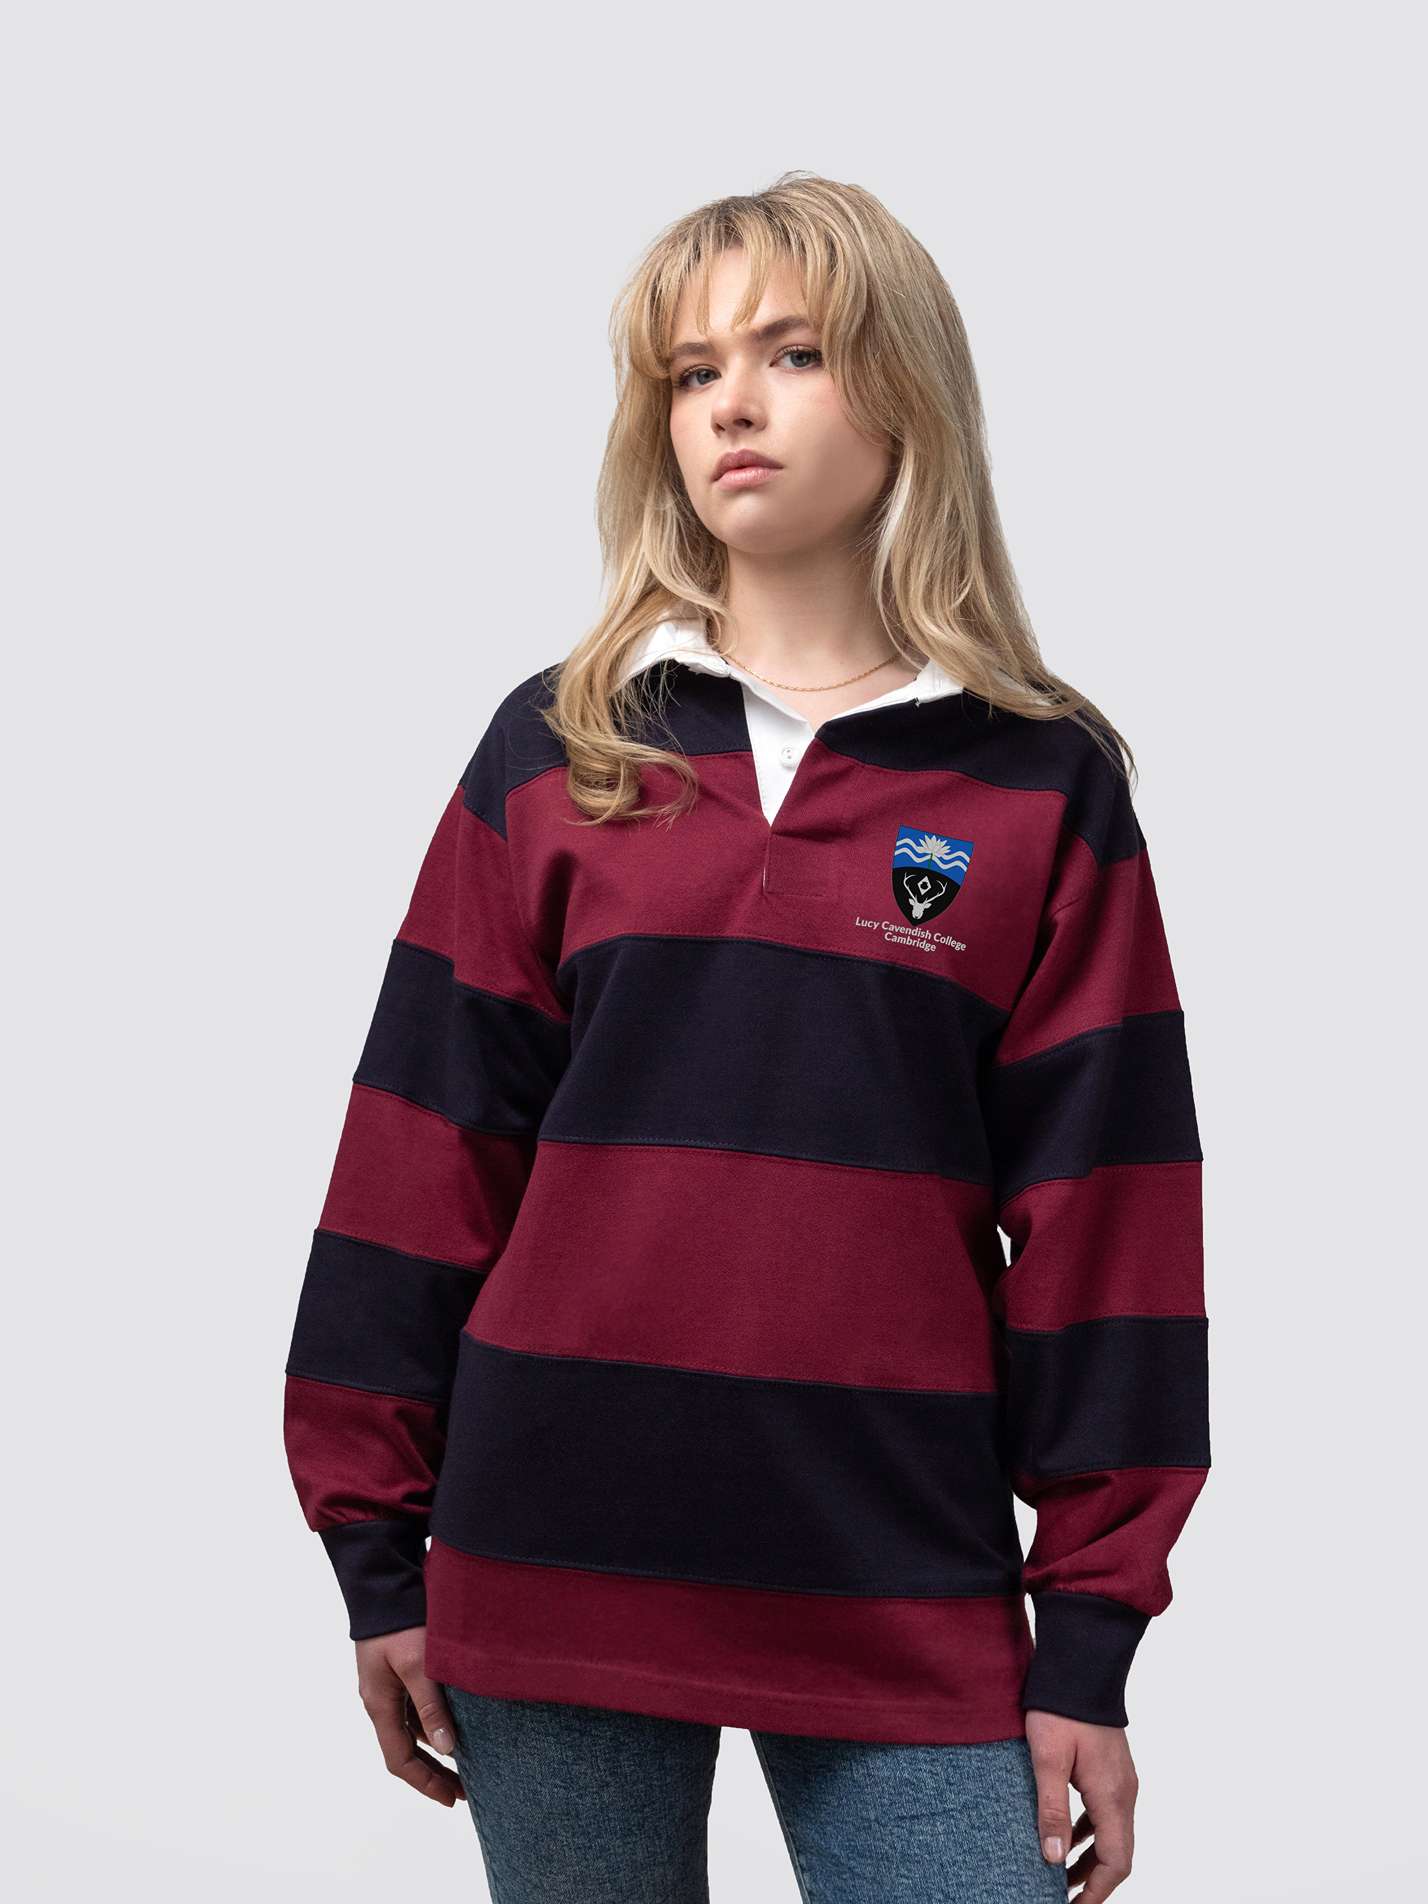 Lucy Cavendish College rugby shirt, with burgundy and navy stripes